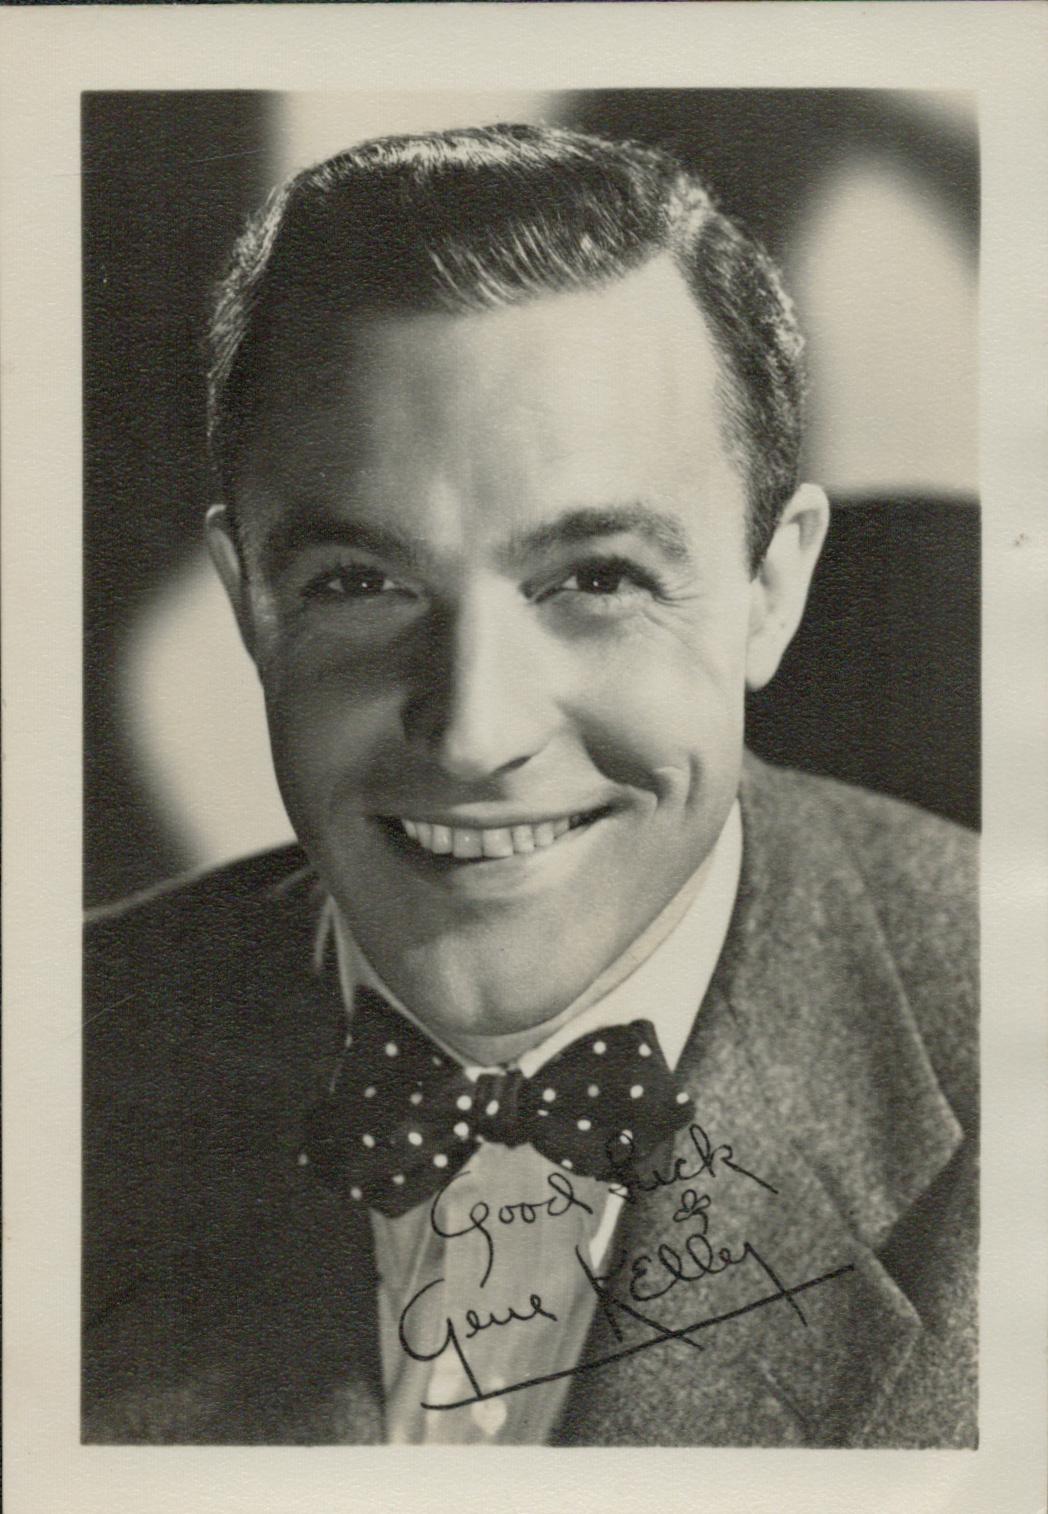 Gene Kelly signed Vintage Black and White Photo 5x3.5 Inch. Was an American dancer, actor, singer,